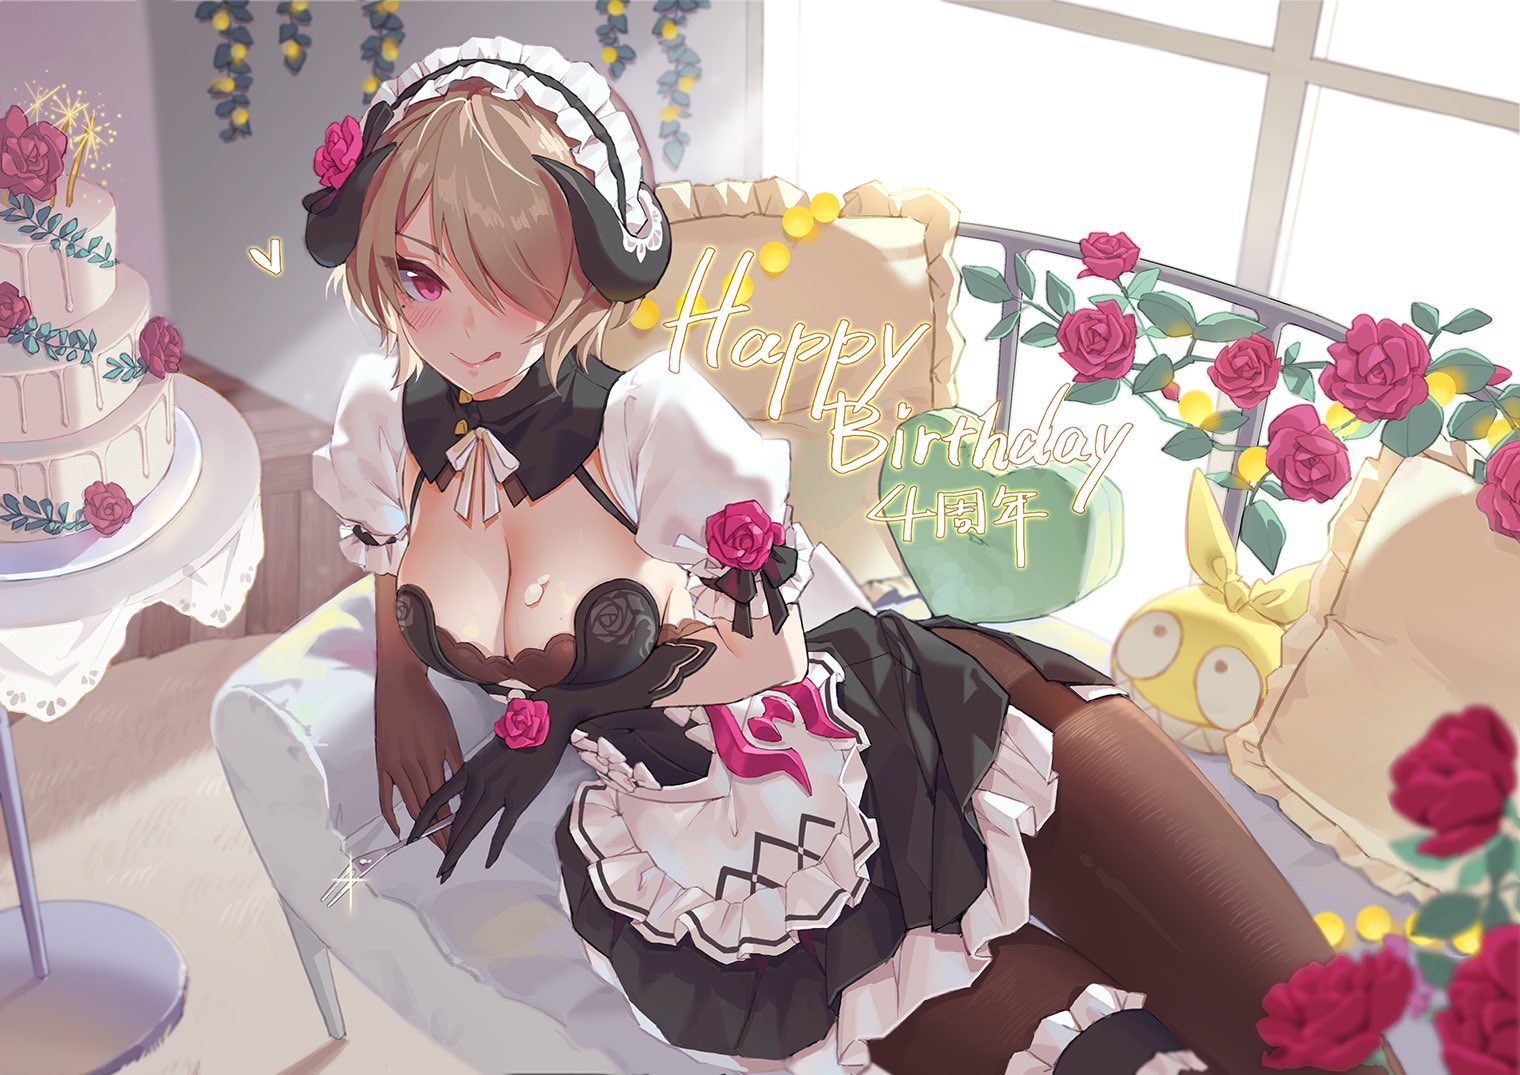 Anime 1520x1075 Rita Rossweisse Honkai Impact boobs cleavage flowers horns fantasy girl hair in face pantyhose maid maid outfit cake food sweets fork birthday